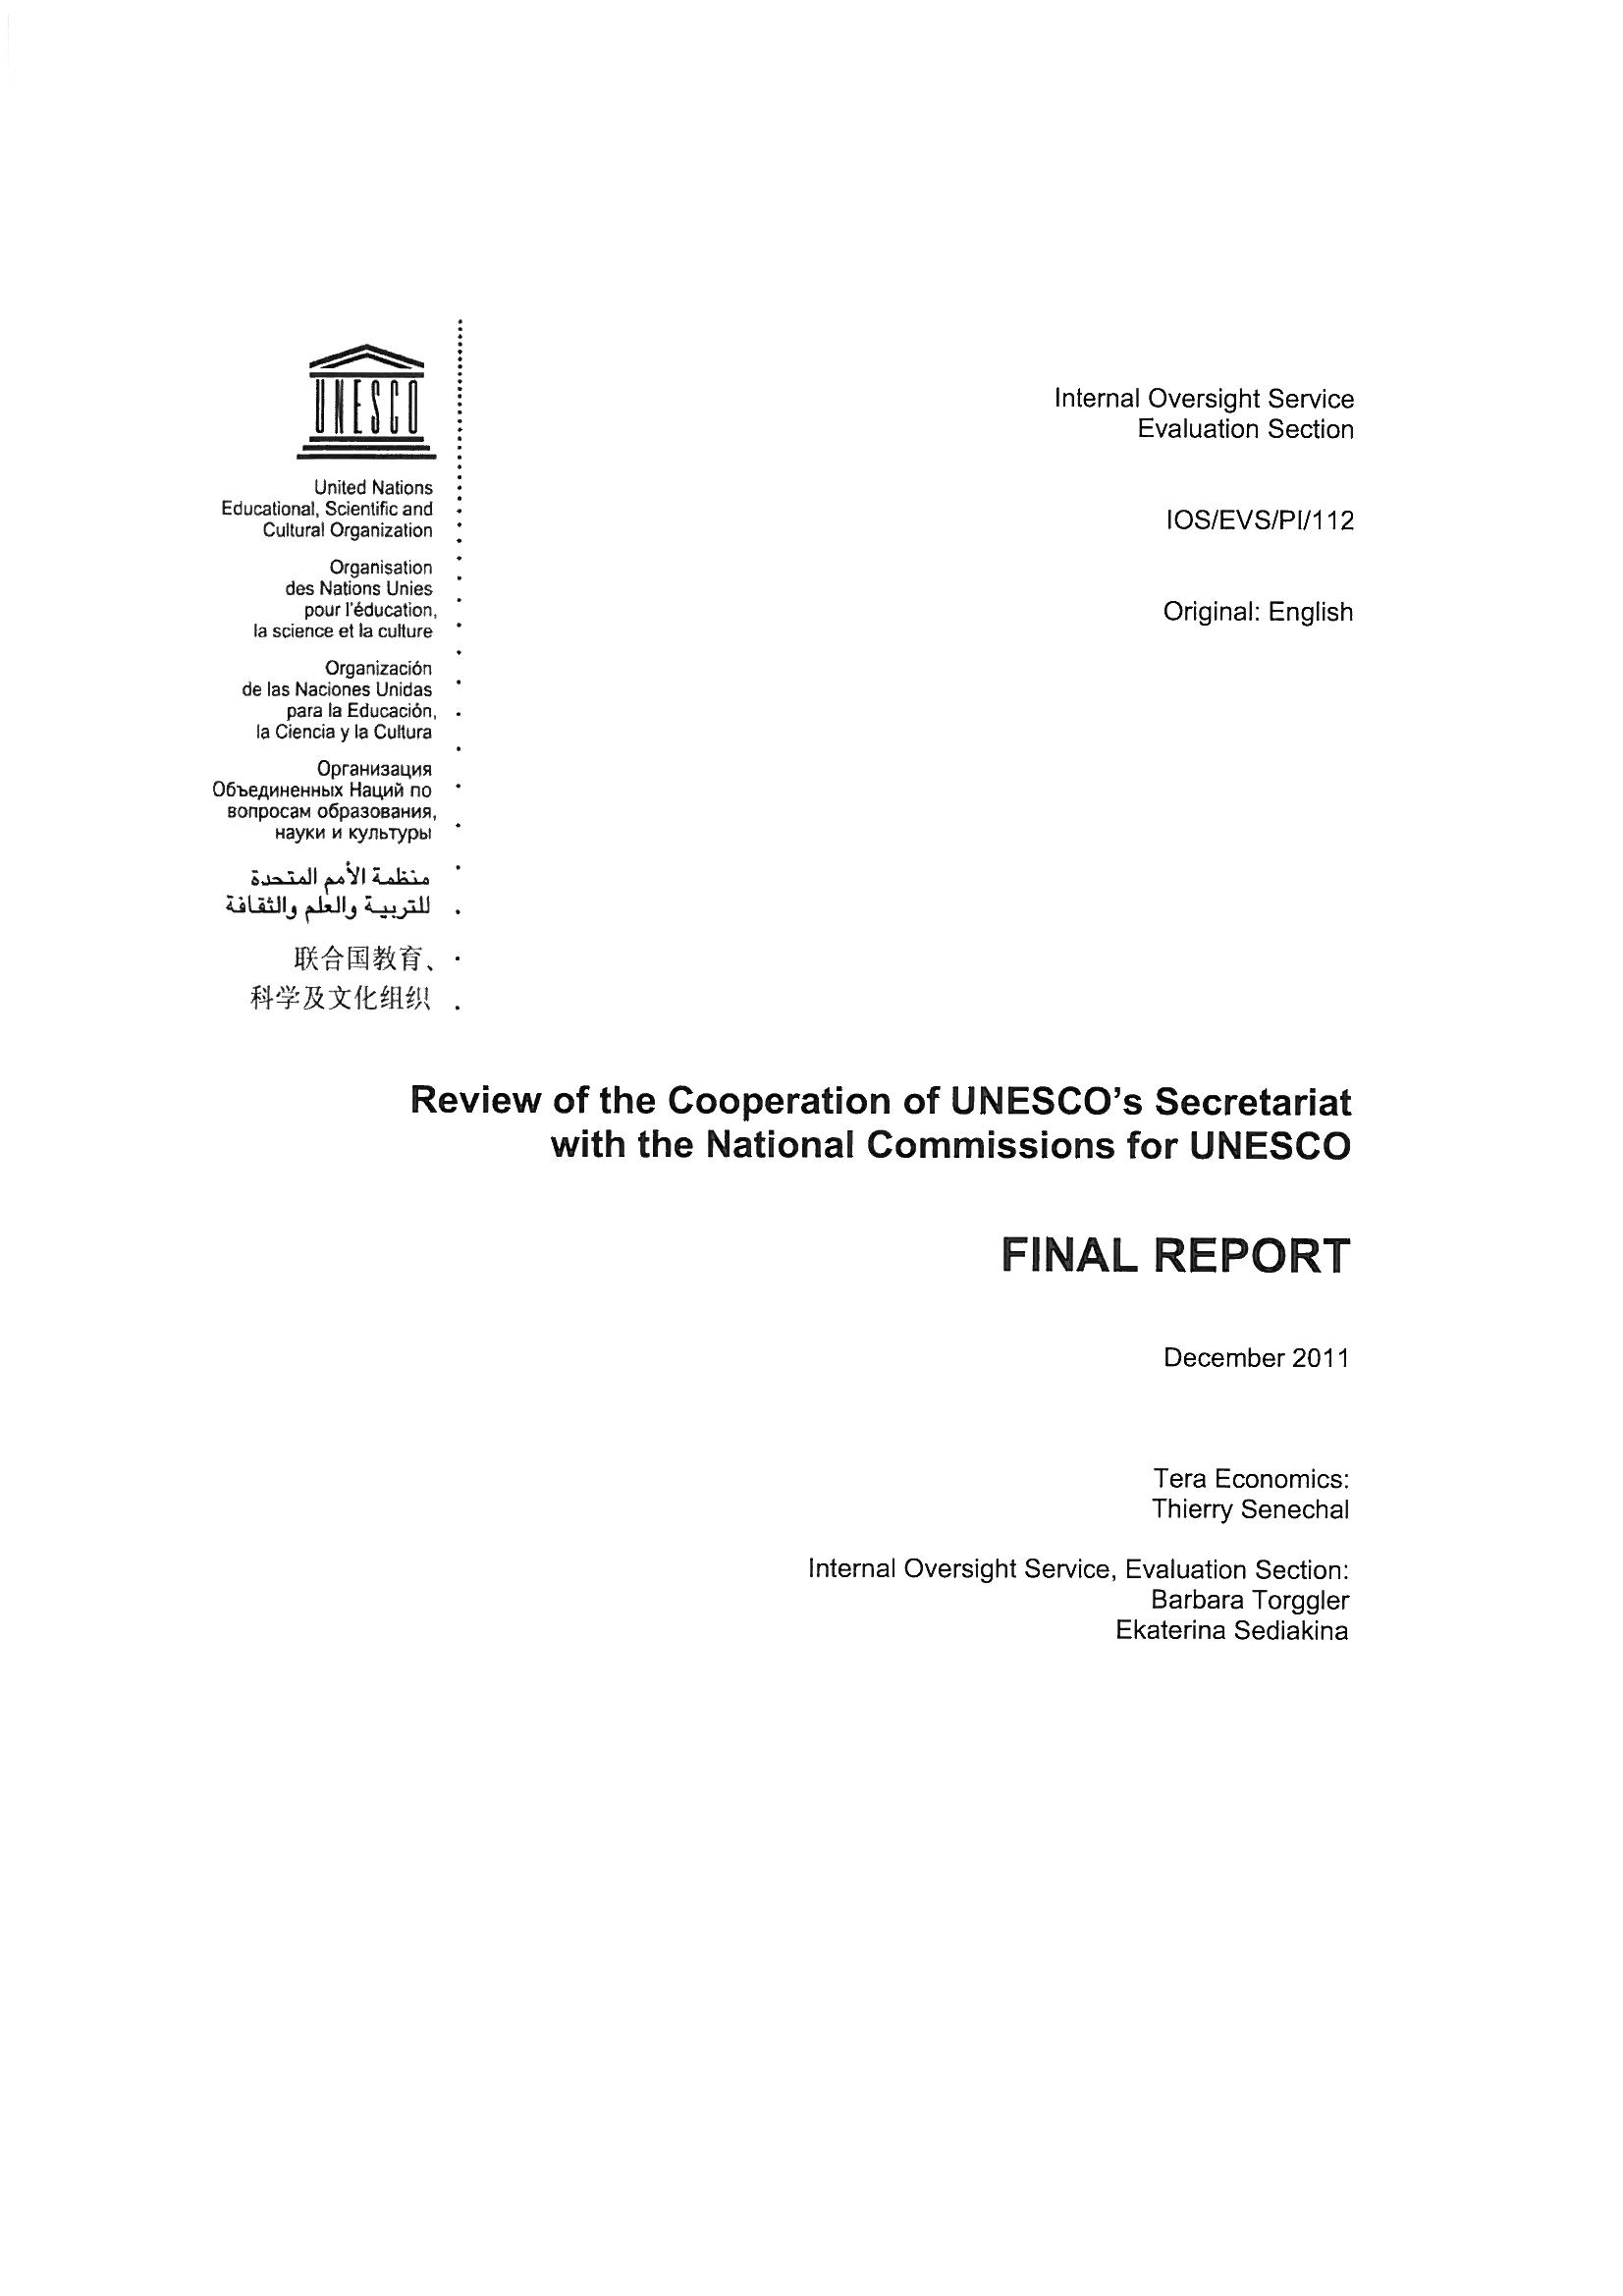 Final report on the review of the cooperation of the Secretariat with National Commissions